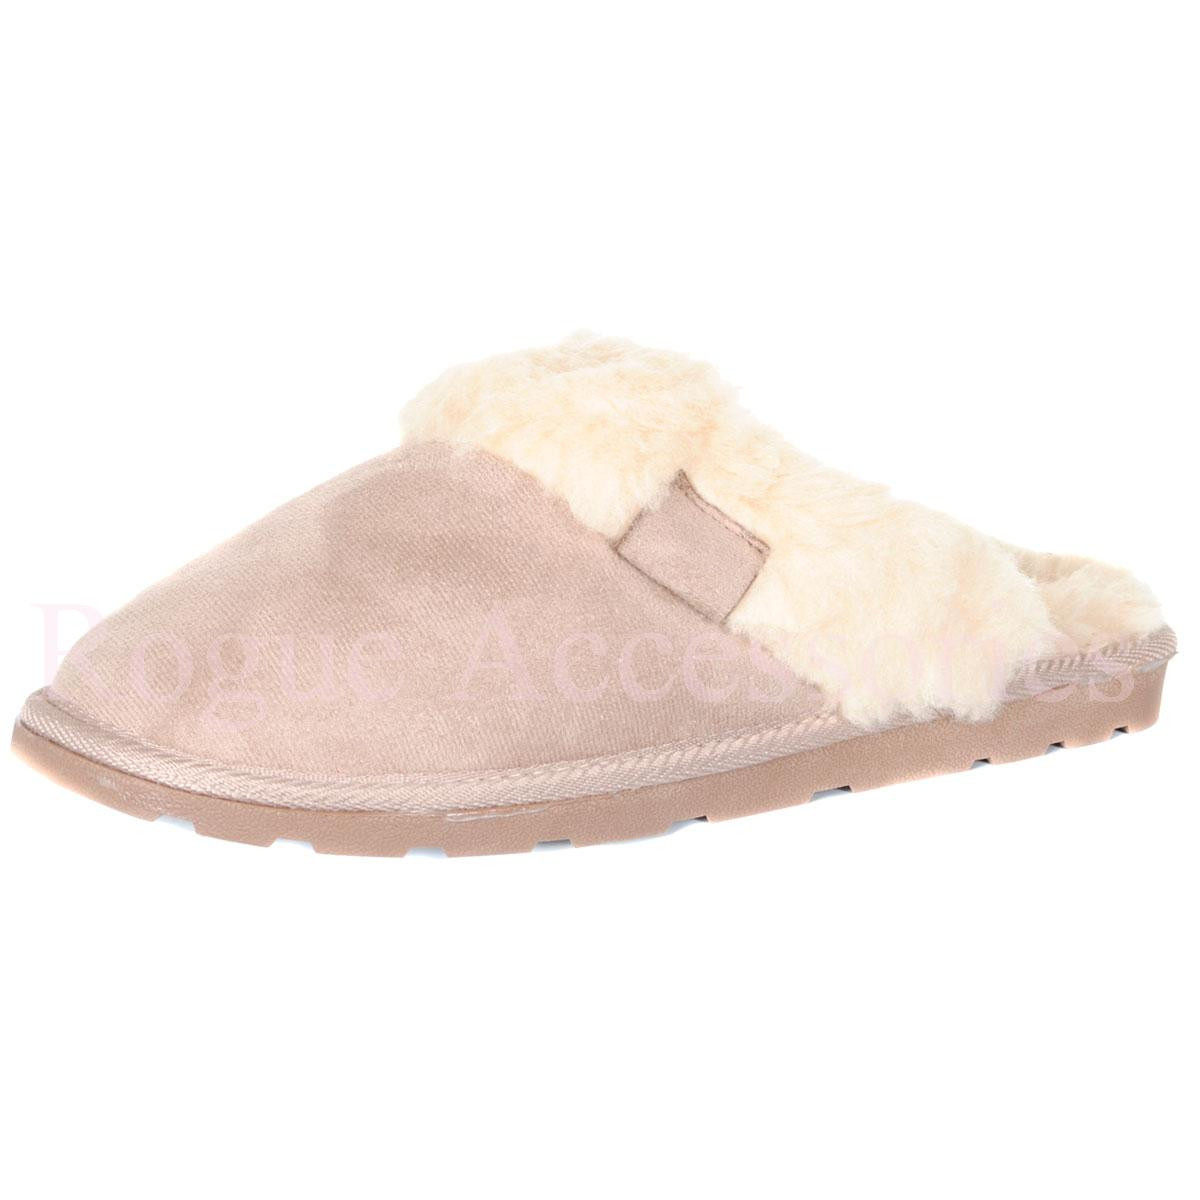 Bedroom Shoes For Womens
 La s Fur Lined Slip Mule Slippers Bedroom House Shoes